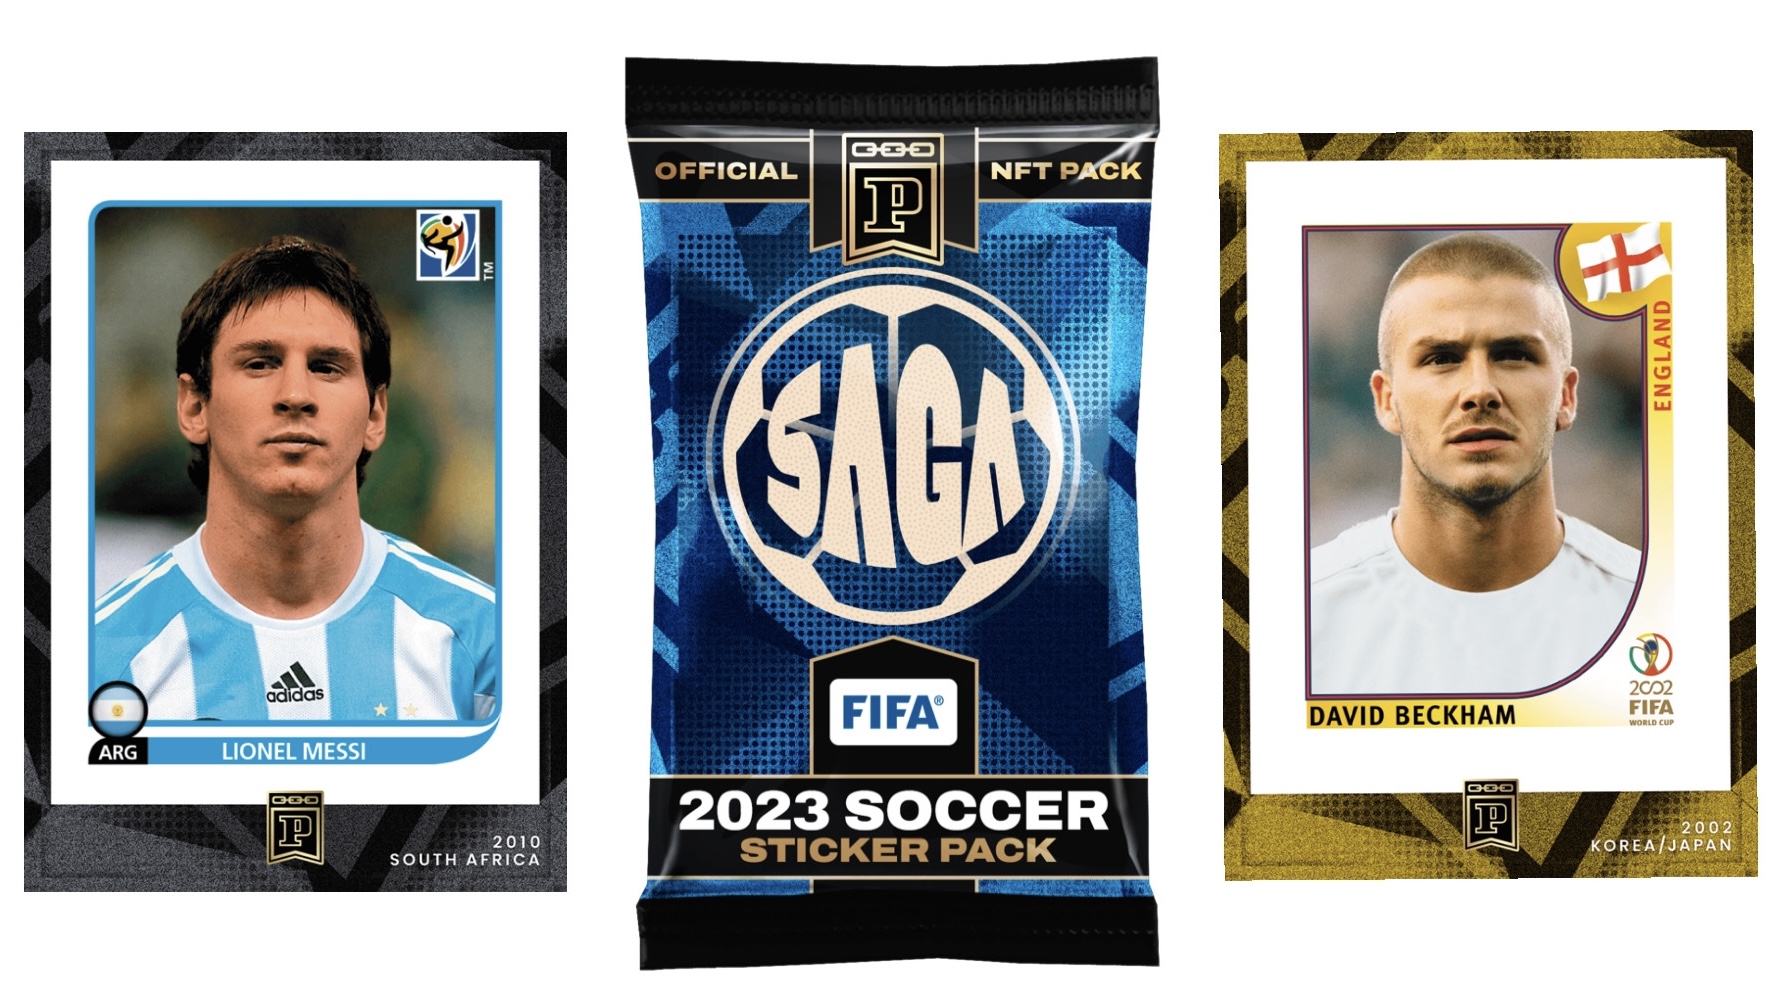 AVAILABLE FRIDAY (4/7) 2023 FIFA World Cup Saga Stickers NFT Packs